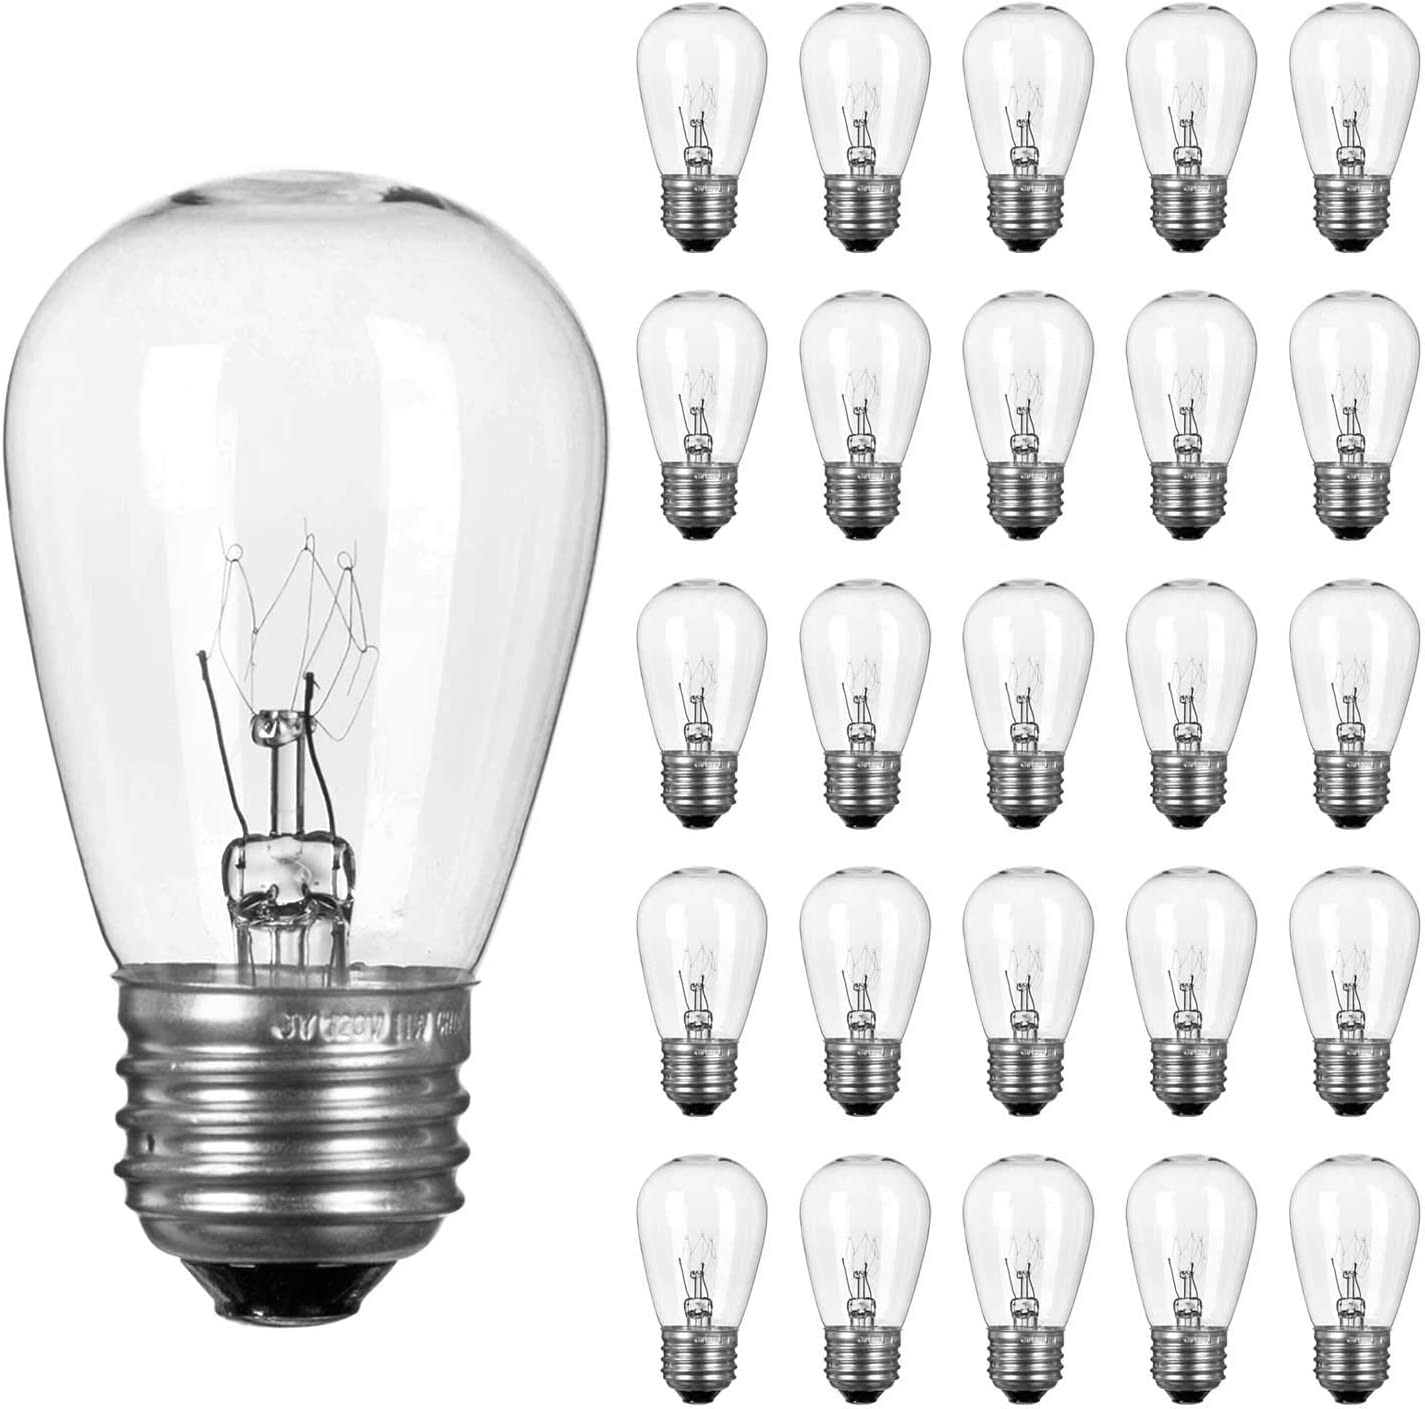 26 Count / Incandescent Bulbs / Warm White